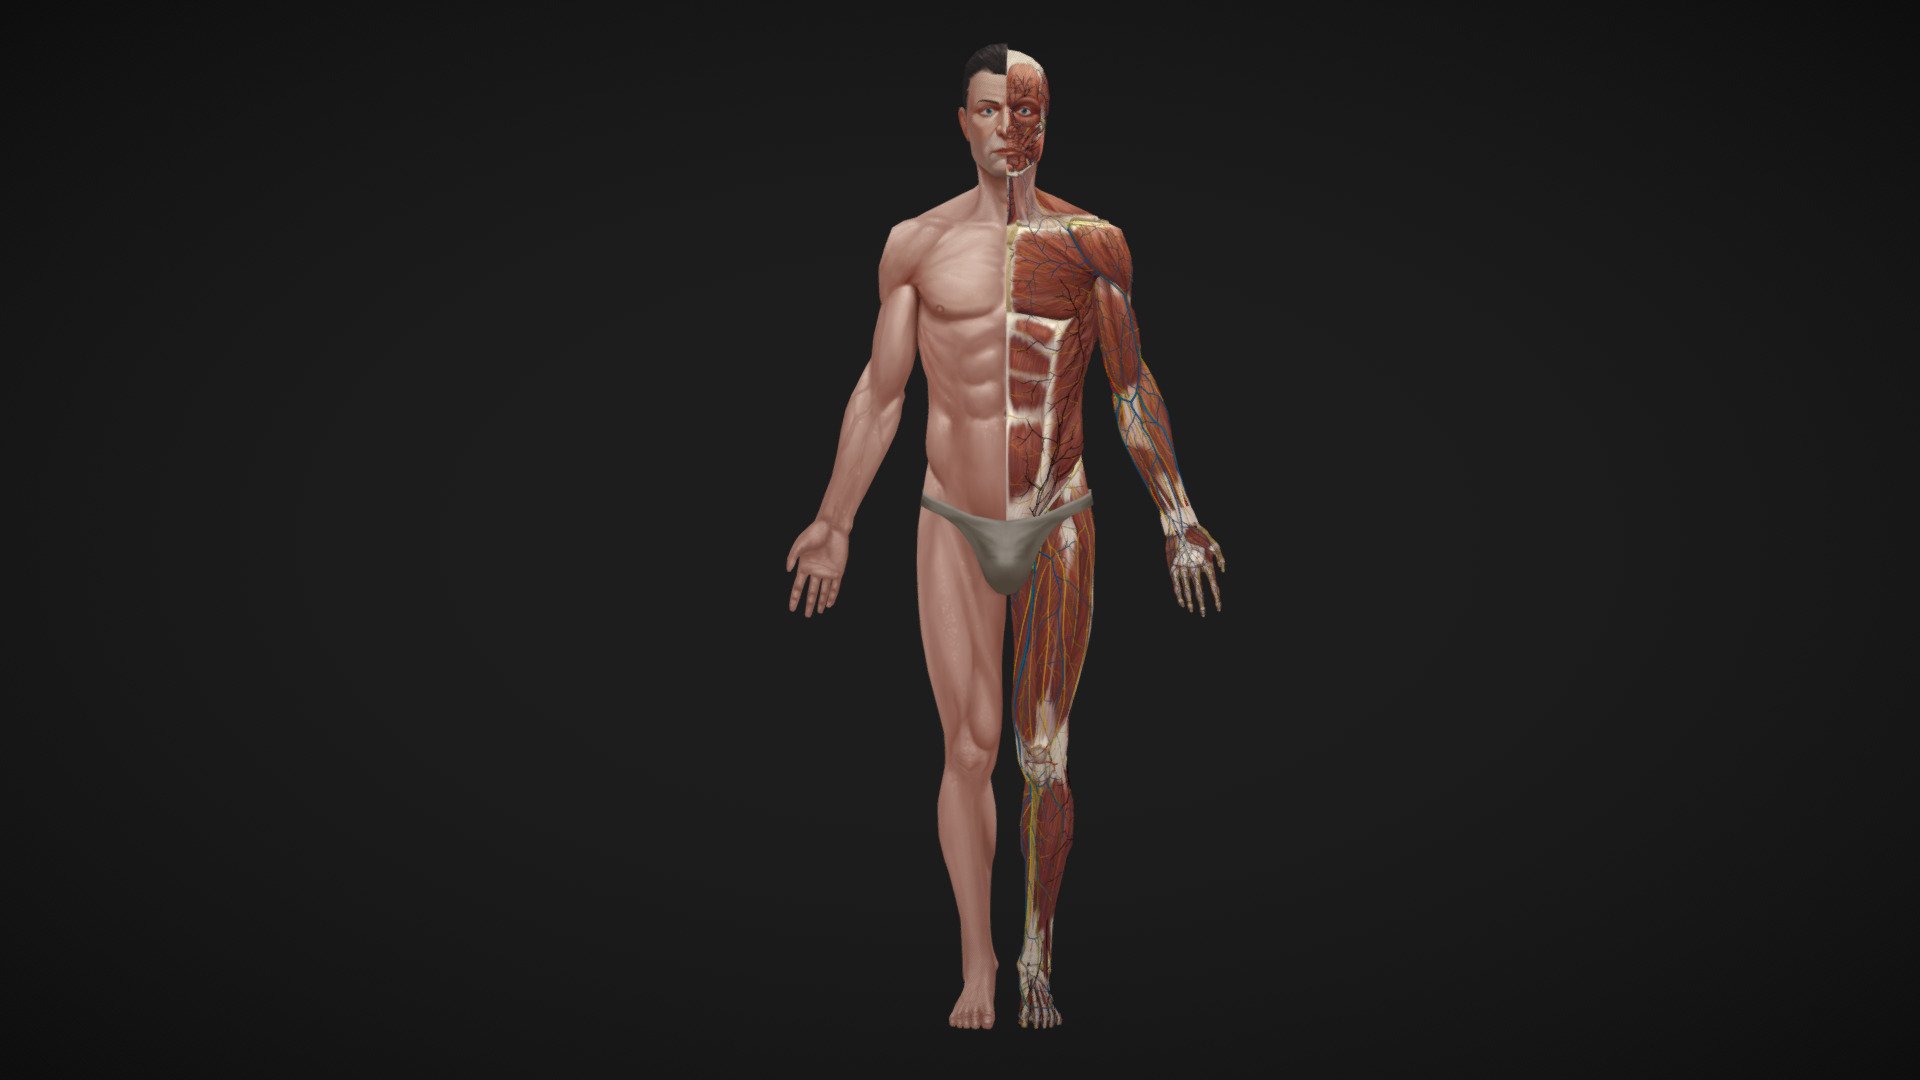 Before buying watch video demo:
https://youtu.be/nQd2Z6uispM

Low poly hand painted human Anatomy Model. Include all major anatomical parts. All the muscles and tendons, Skeleton, Organs and glands, Circulatory system, Nervous system, Lymphatic system, respiratory system etc.
Some object have only single side (like some muscles, veins etc.) to reduce poly count.
Textures are handpainted. Light is painted in to texture so model work best with flat lighting (this also improve speed)
I am not medically trained so some smaller parts may be inconsistent as different sources describe them differently.

Model poly count:
Verts: 260 104
Faces: 201 771
Tris: 368 069
All textures are 4k .png

File format: .blend .fbx .obj
Blend fille with al gruped and named parts is in .zip archive - Low poly hand painted anatomy model - Buy Royalty Free 3D model by graft 3d model